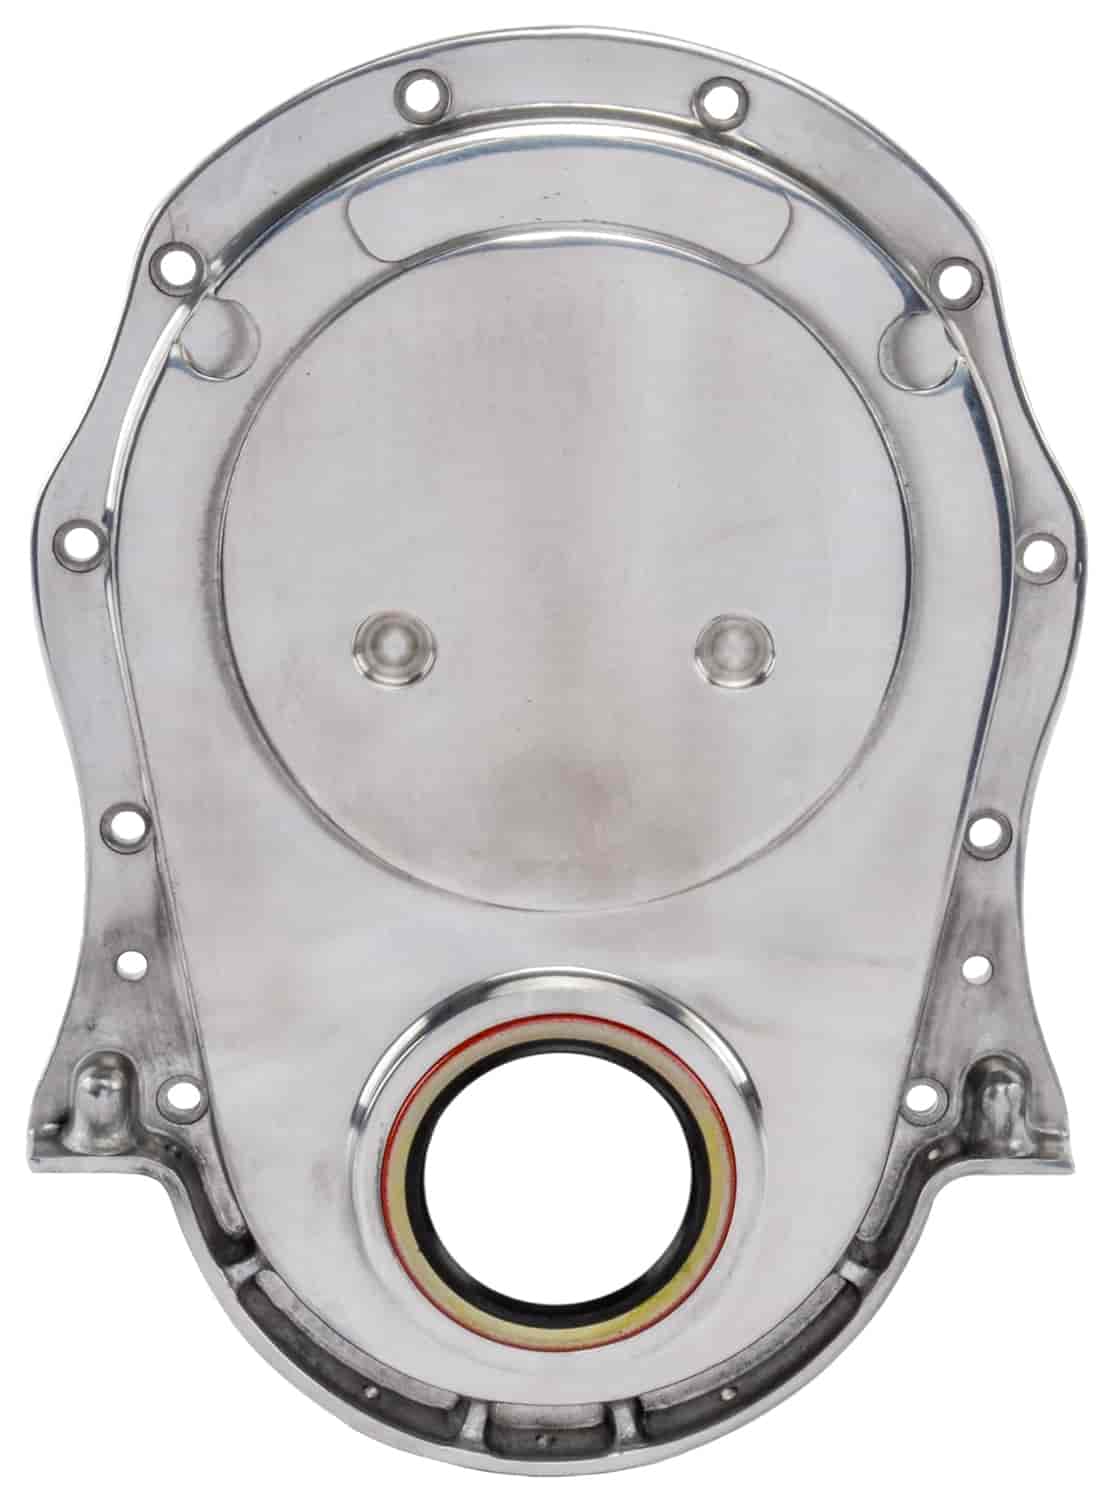 Timing Cover for 1965-1990 Big Block Chevy Gen IV [Polished Aluminum]